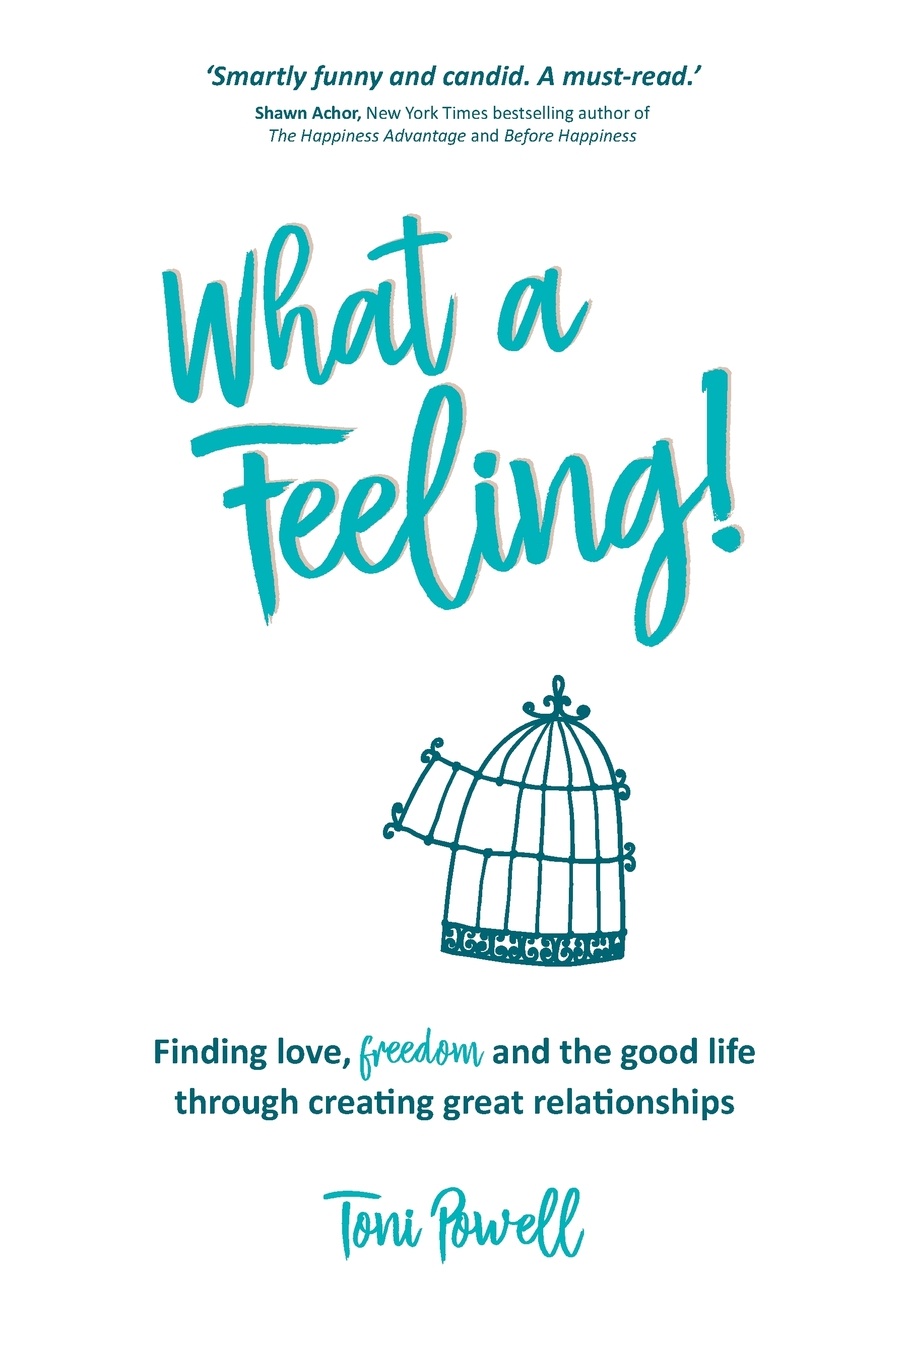 What a Feeling!. Finding love, freedom and the good life through creating great relationships